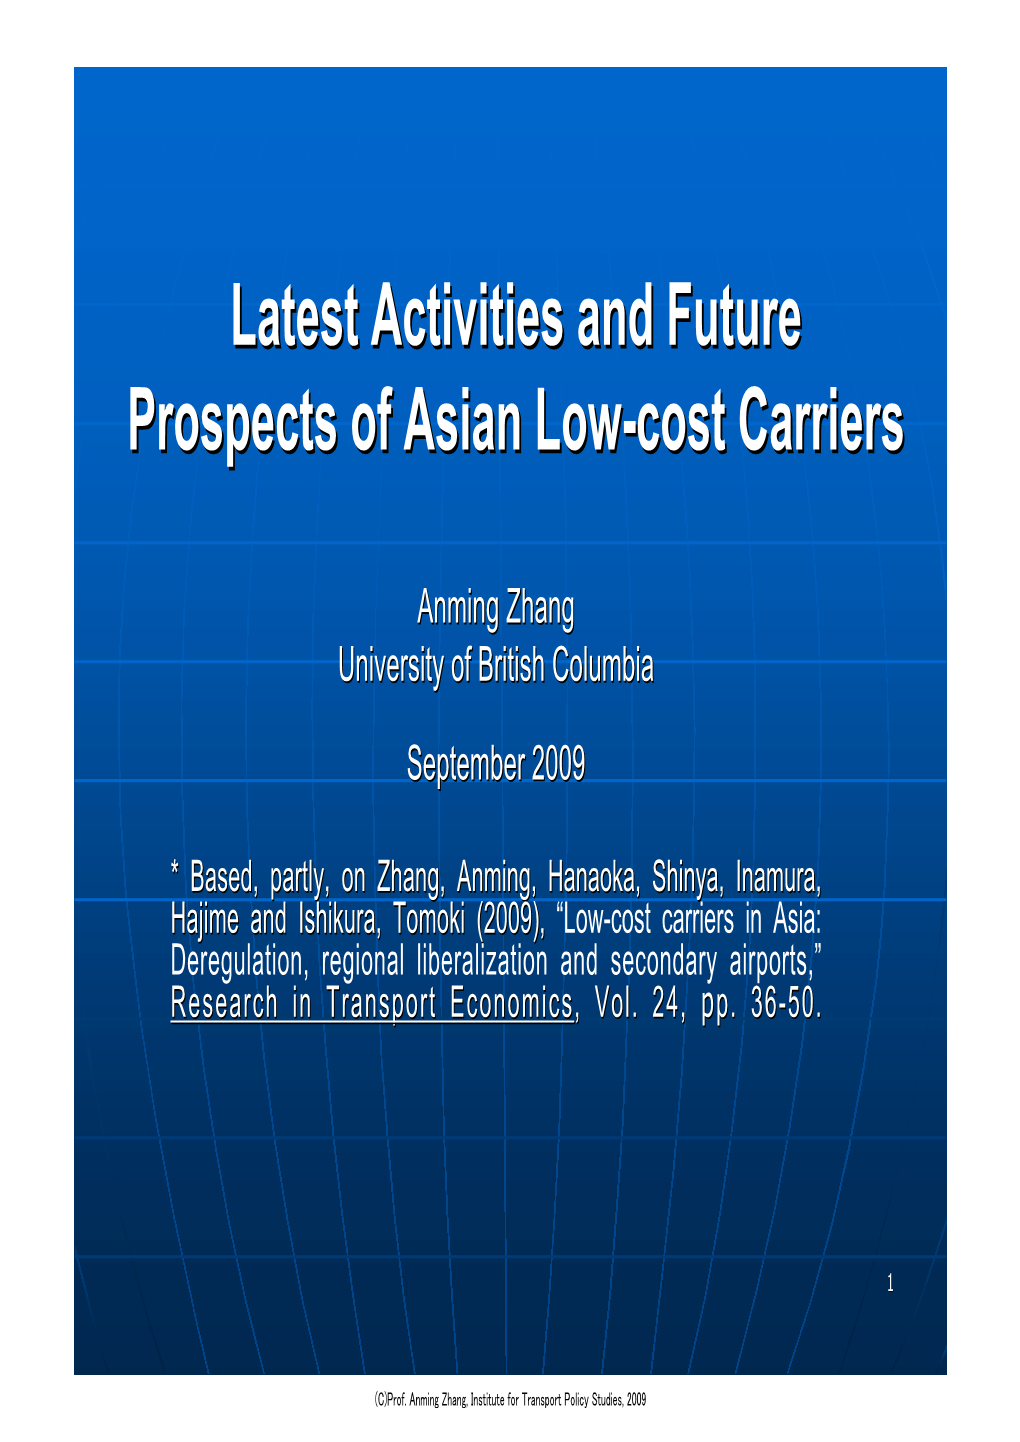 Latest Activities and Future Prospects of Asian Low-Cost Carriers